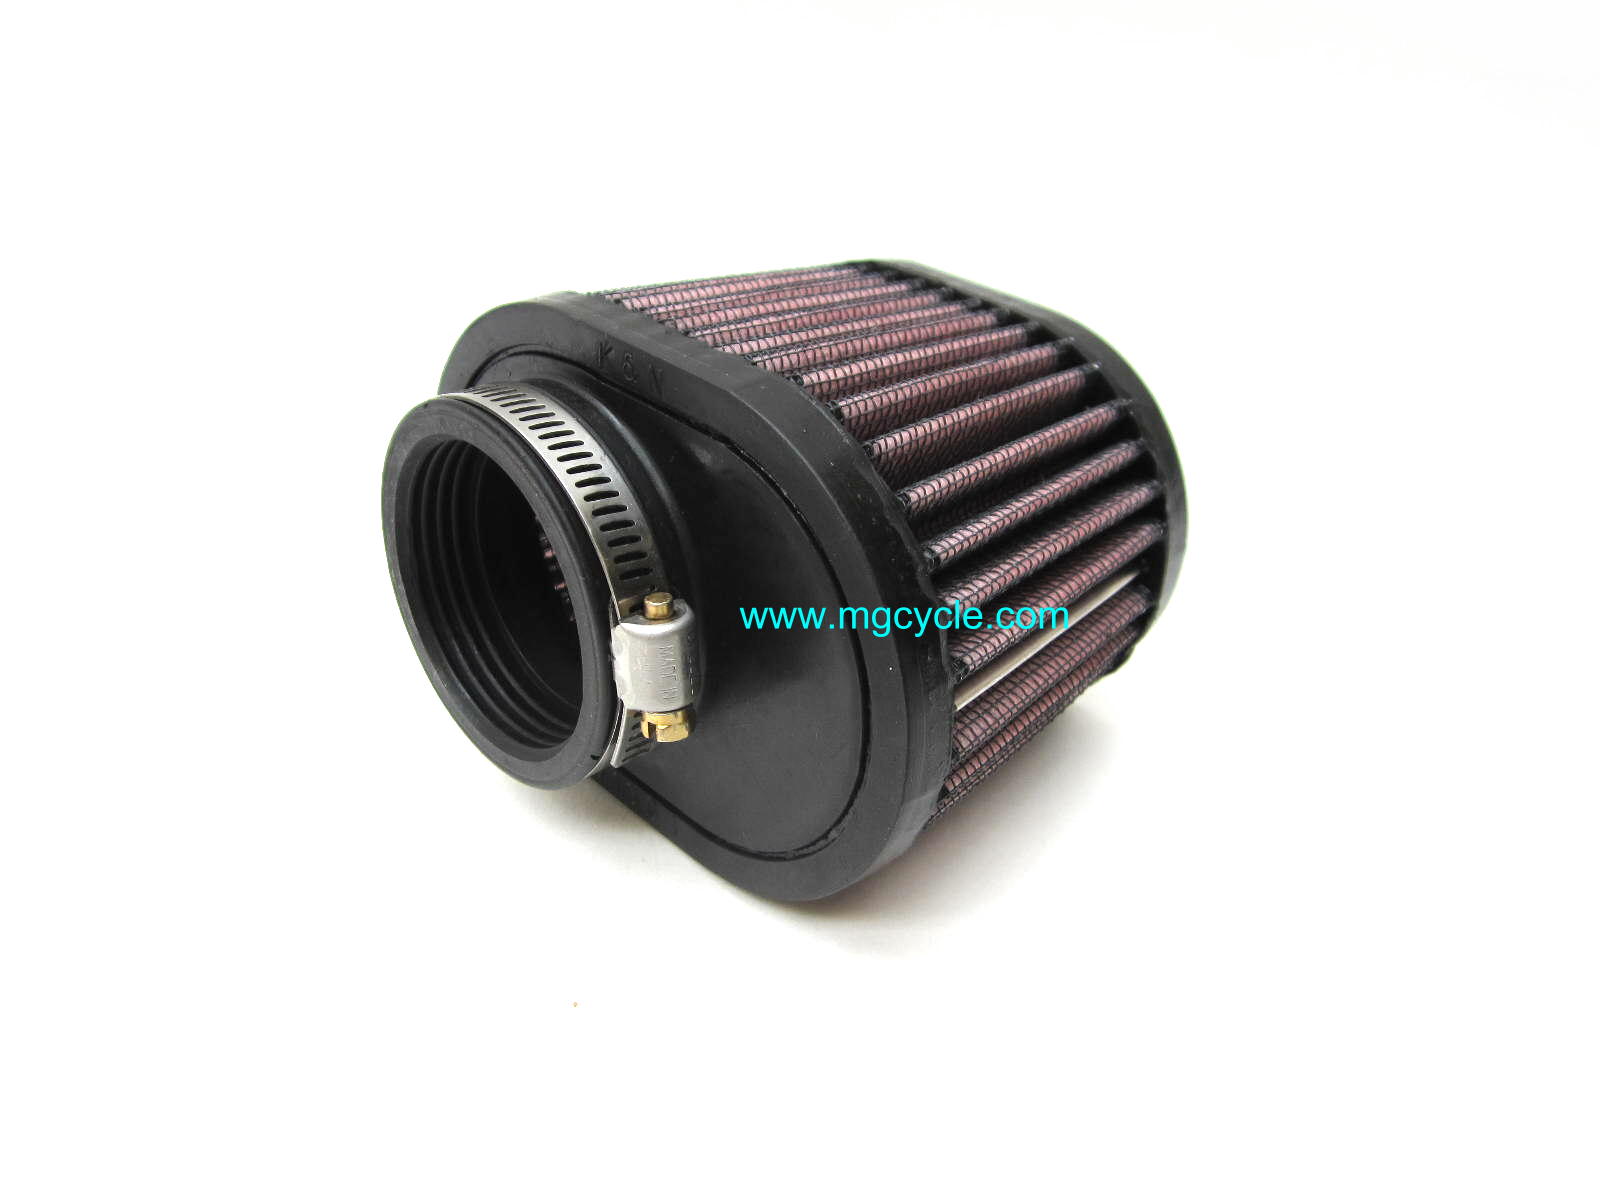 K&N air filter for PHF30/32/34/36 - T3 etc style velocity stacks